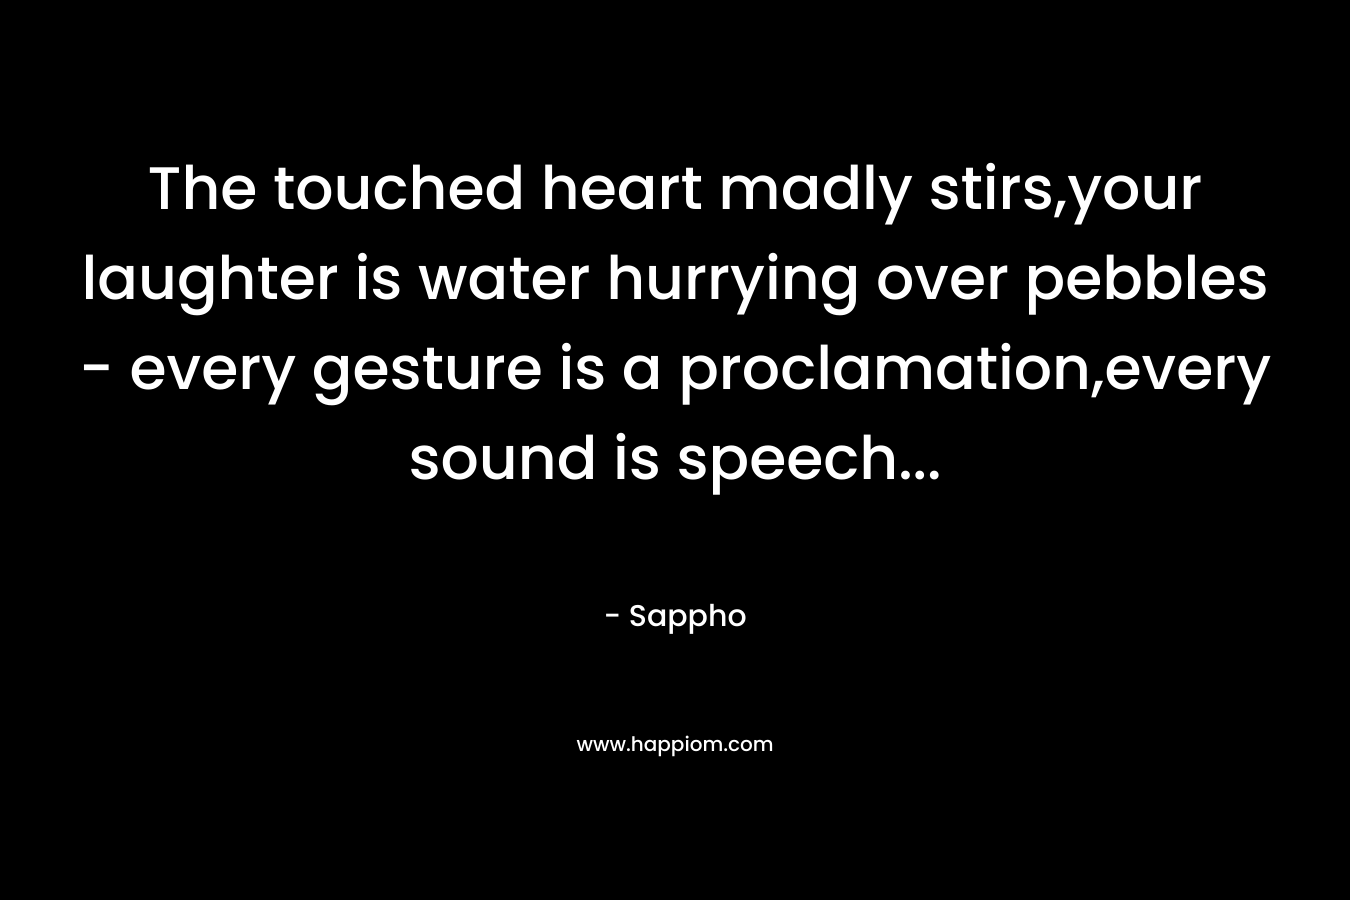 The touched heart madly stirs,your laughter is water hurrying over pebbles – every gesture is a proclamation,every sound is speech… – Sappho